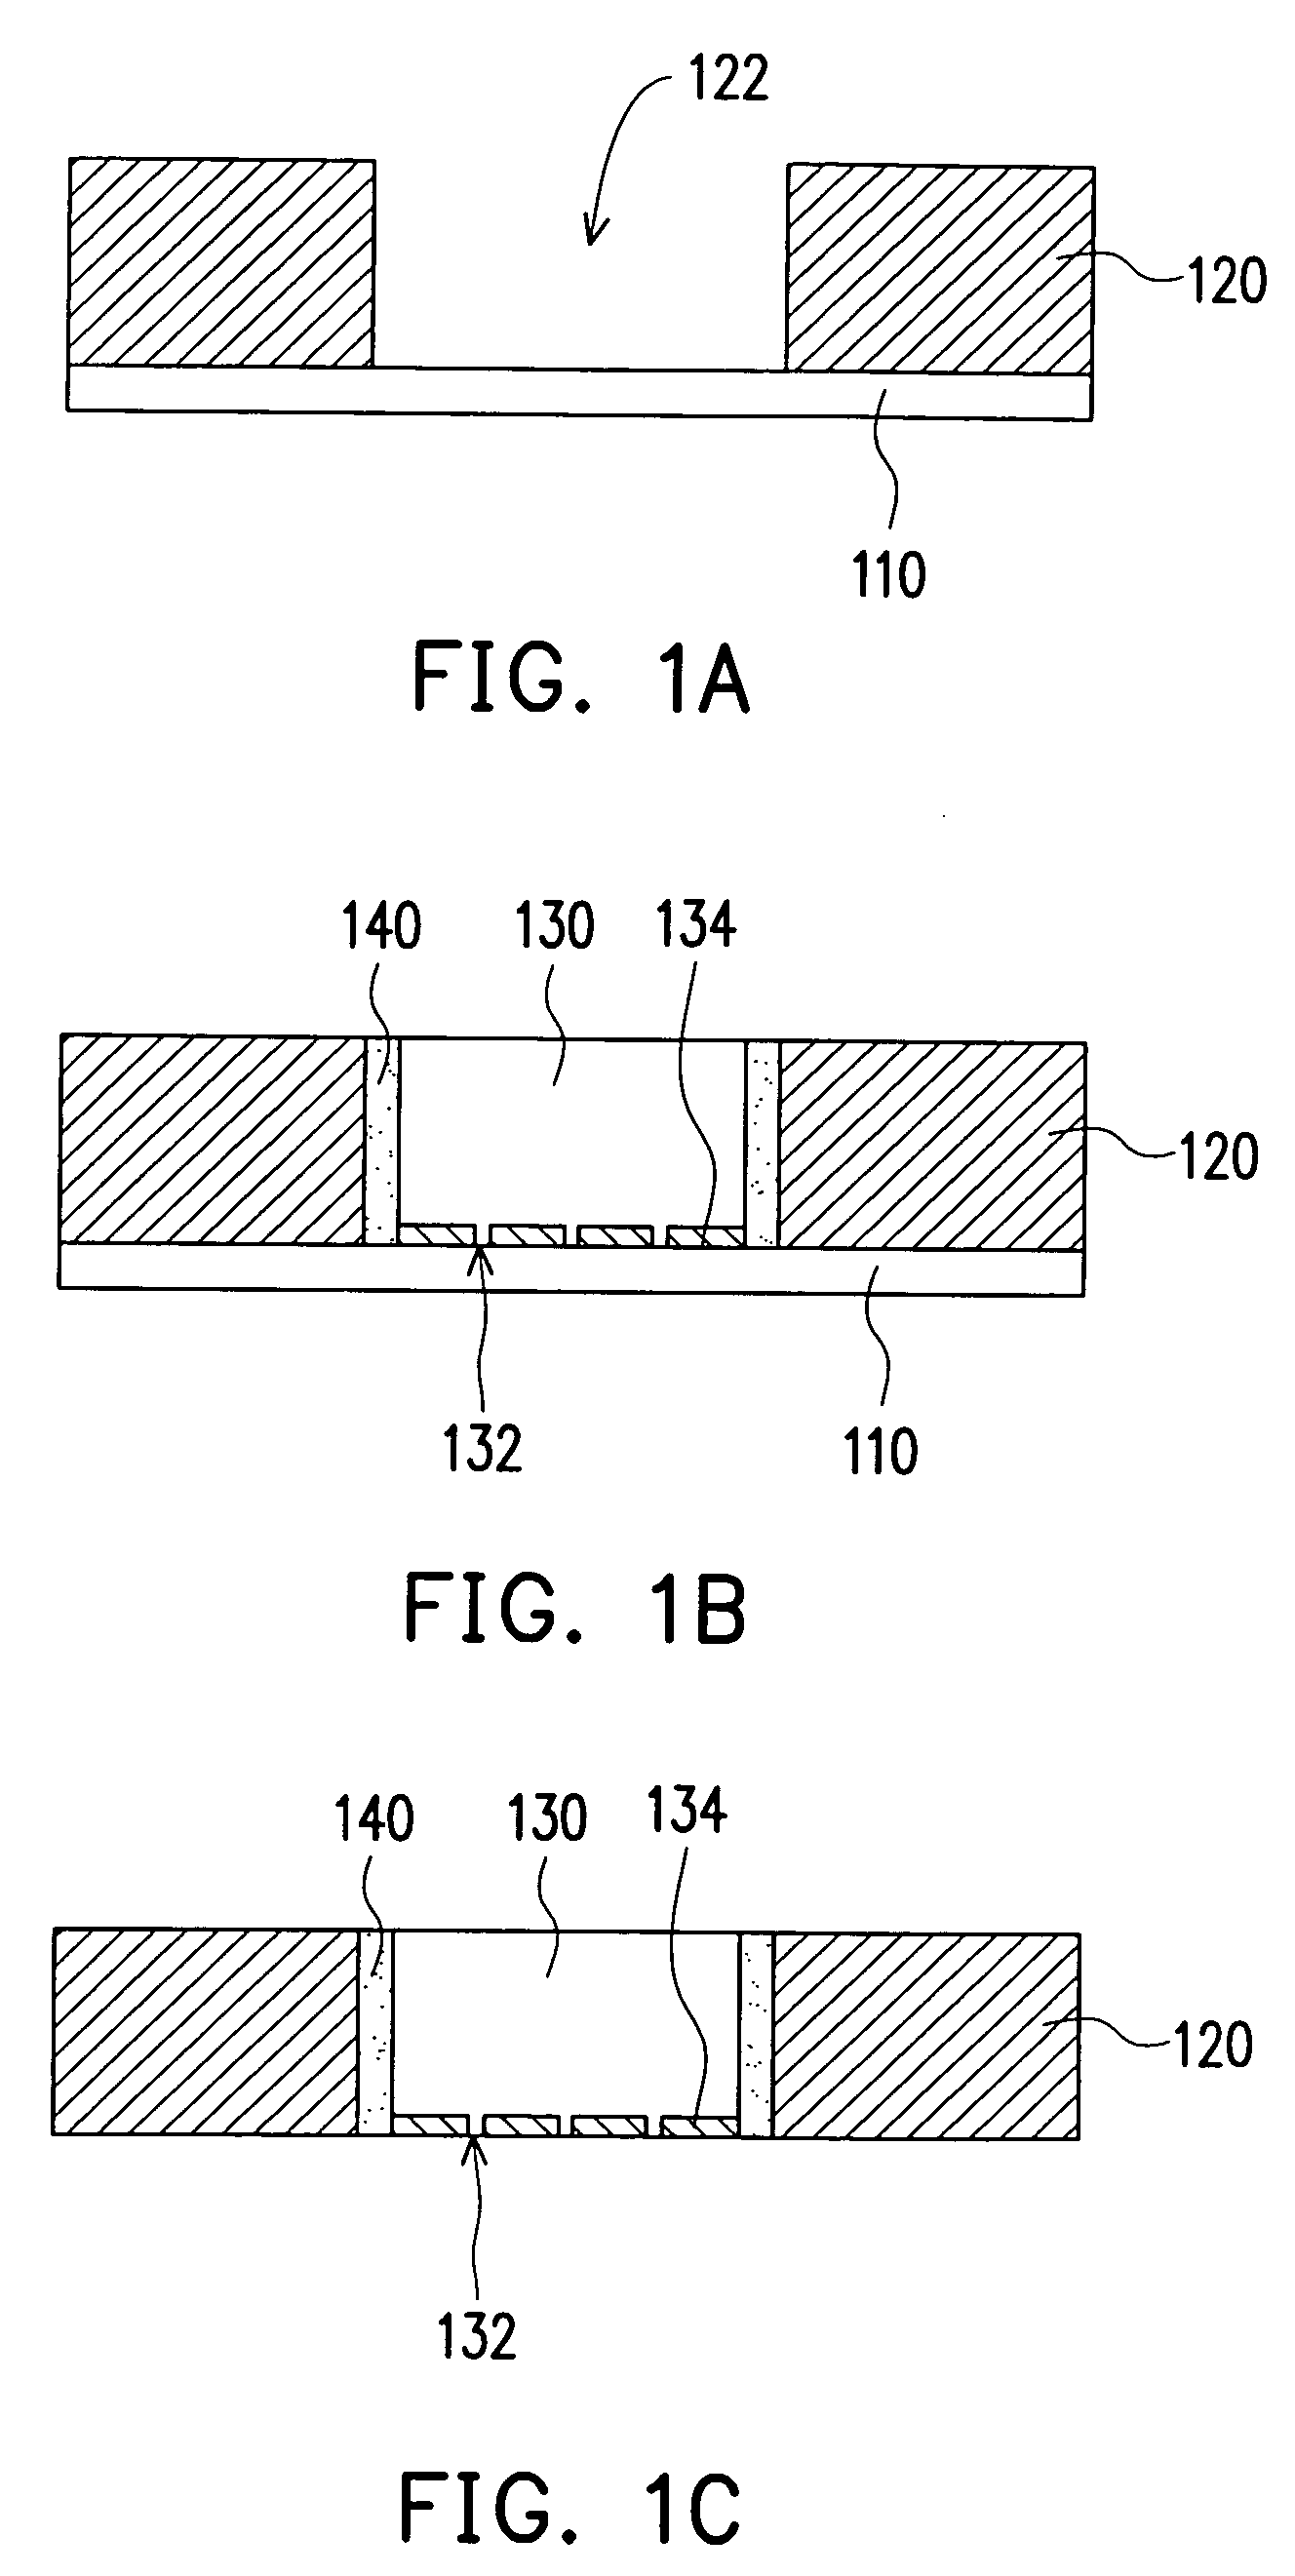 Chip embedded package structure